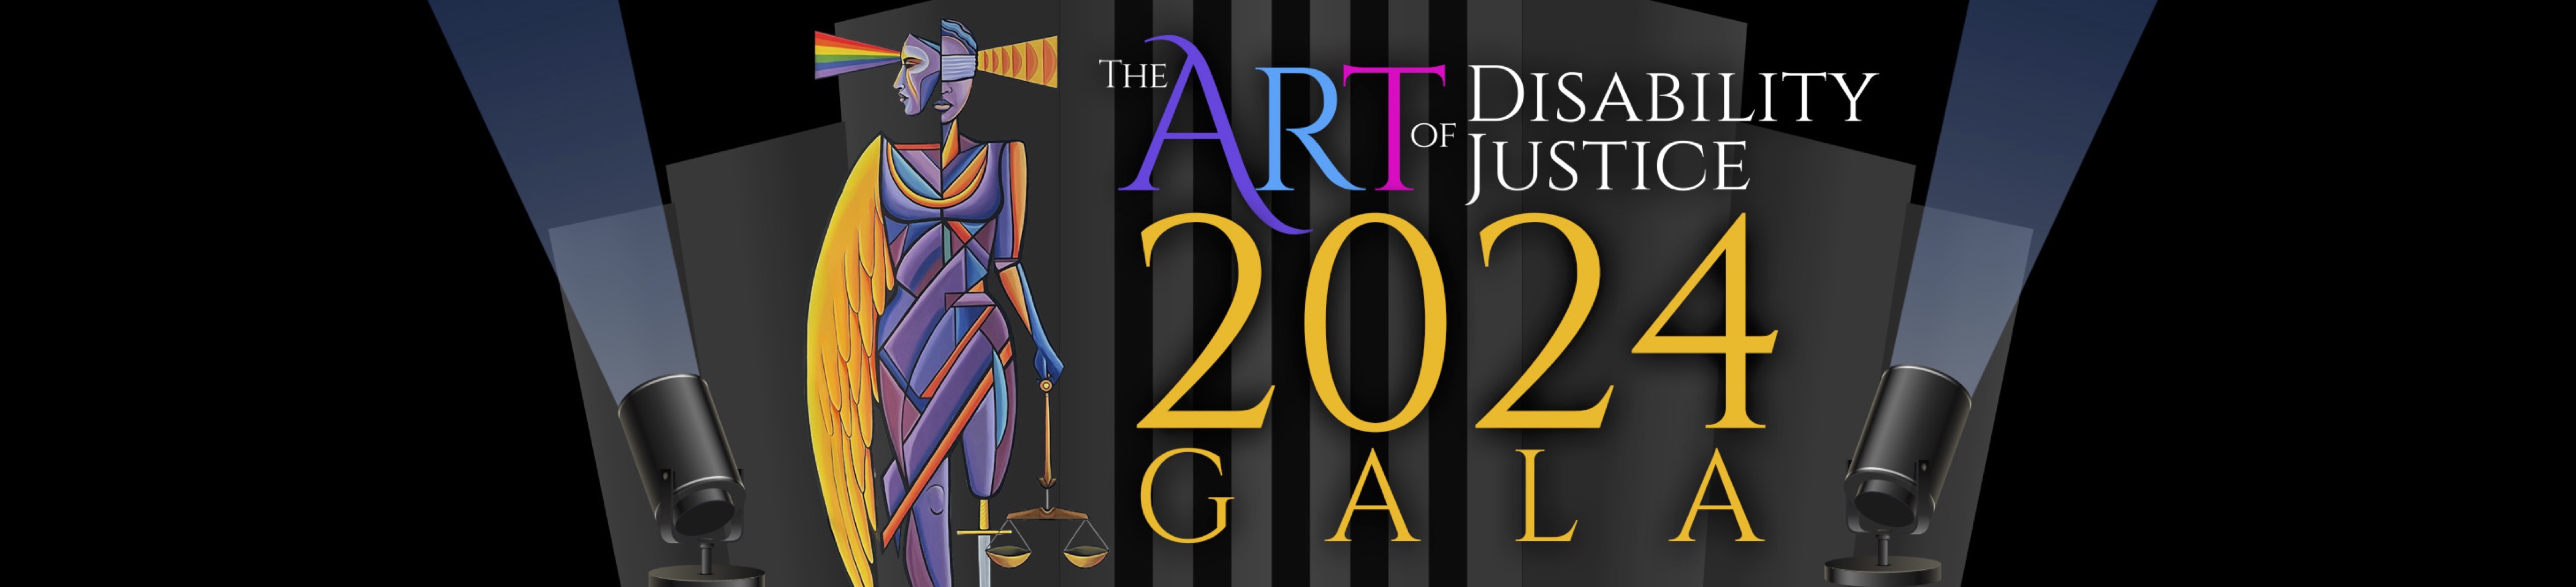 Lady Justice with two spotlights with supporting text: The Art of Disability Justice 2024 Gala